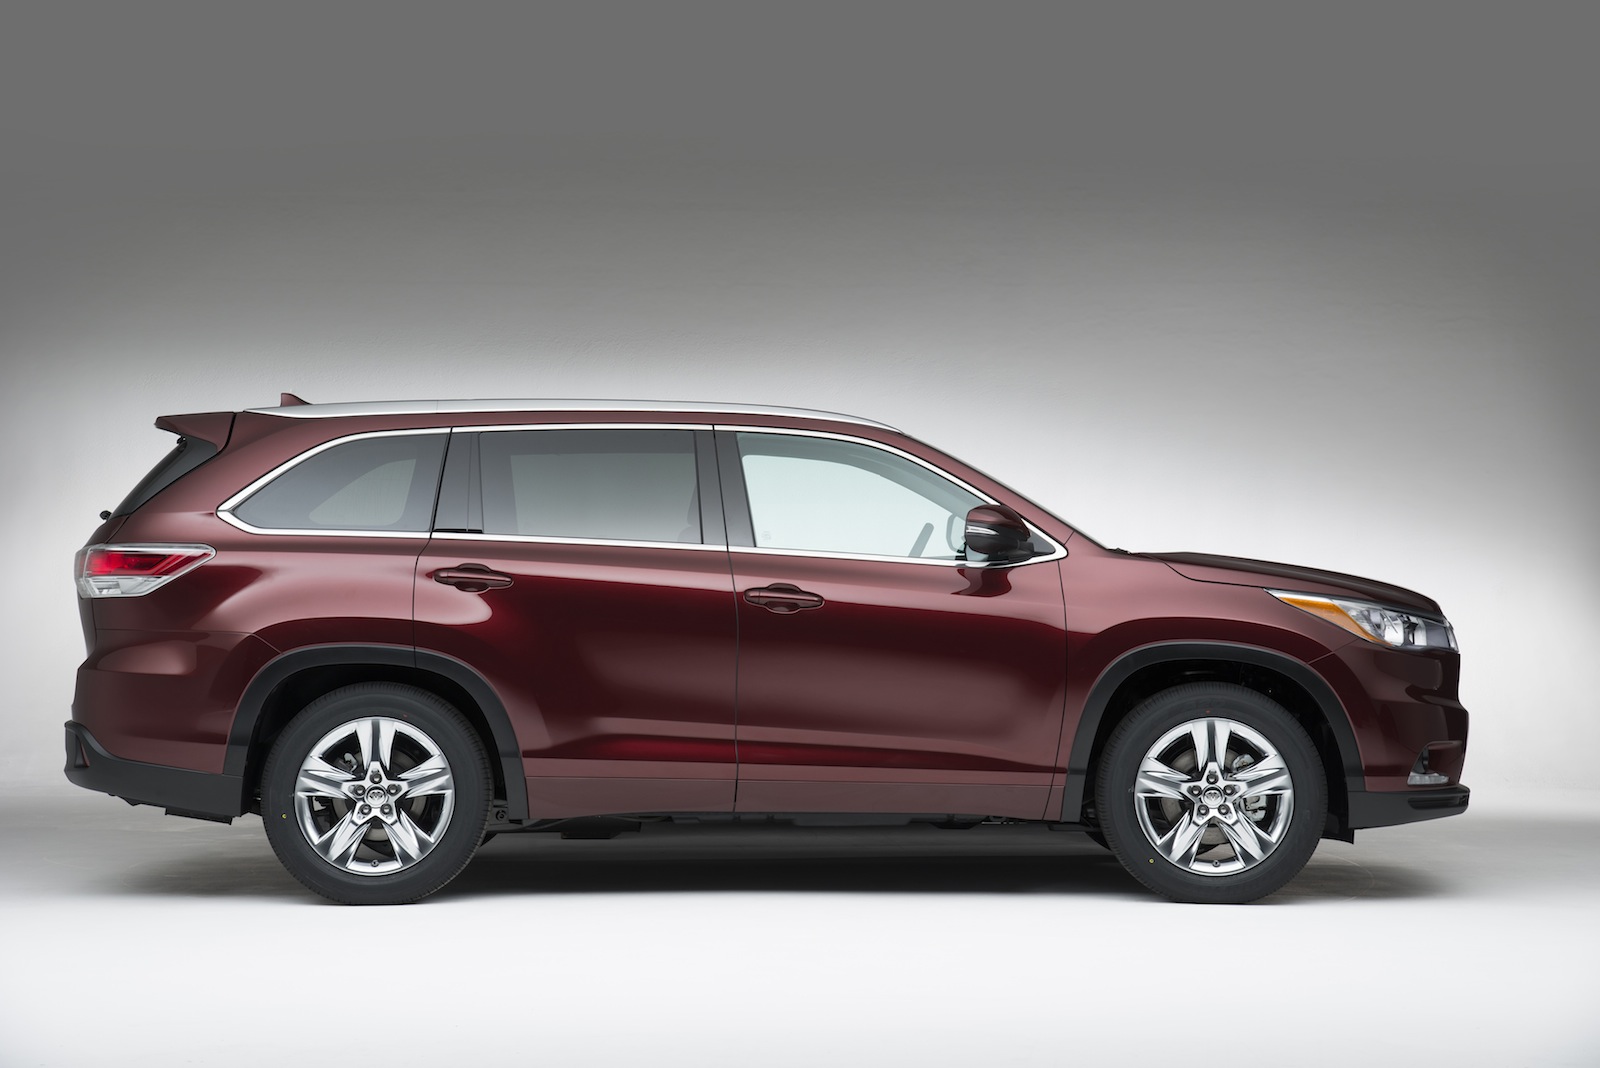 Toyota Kluger all new SUV now seats eight but still 